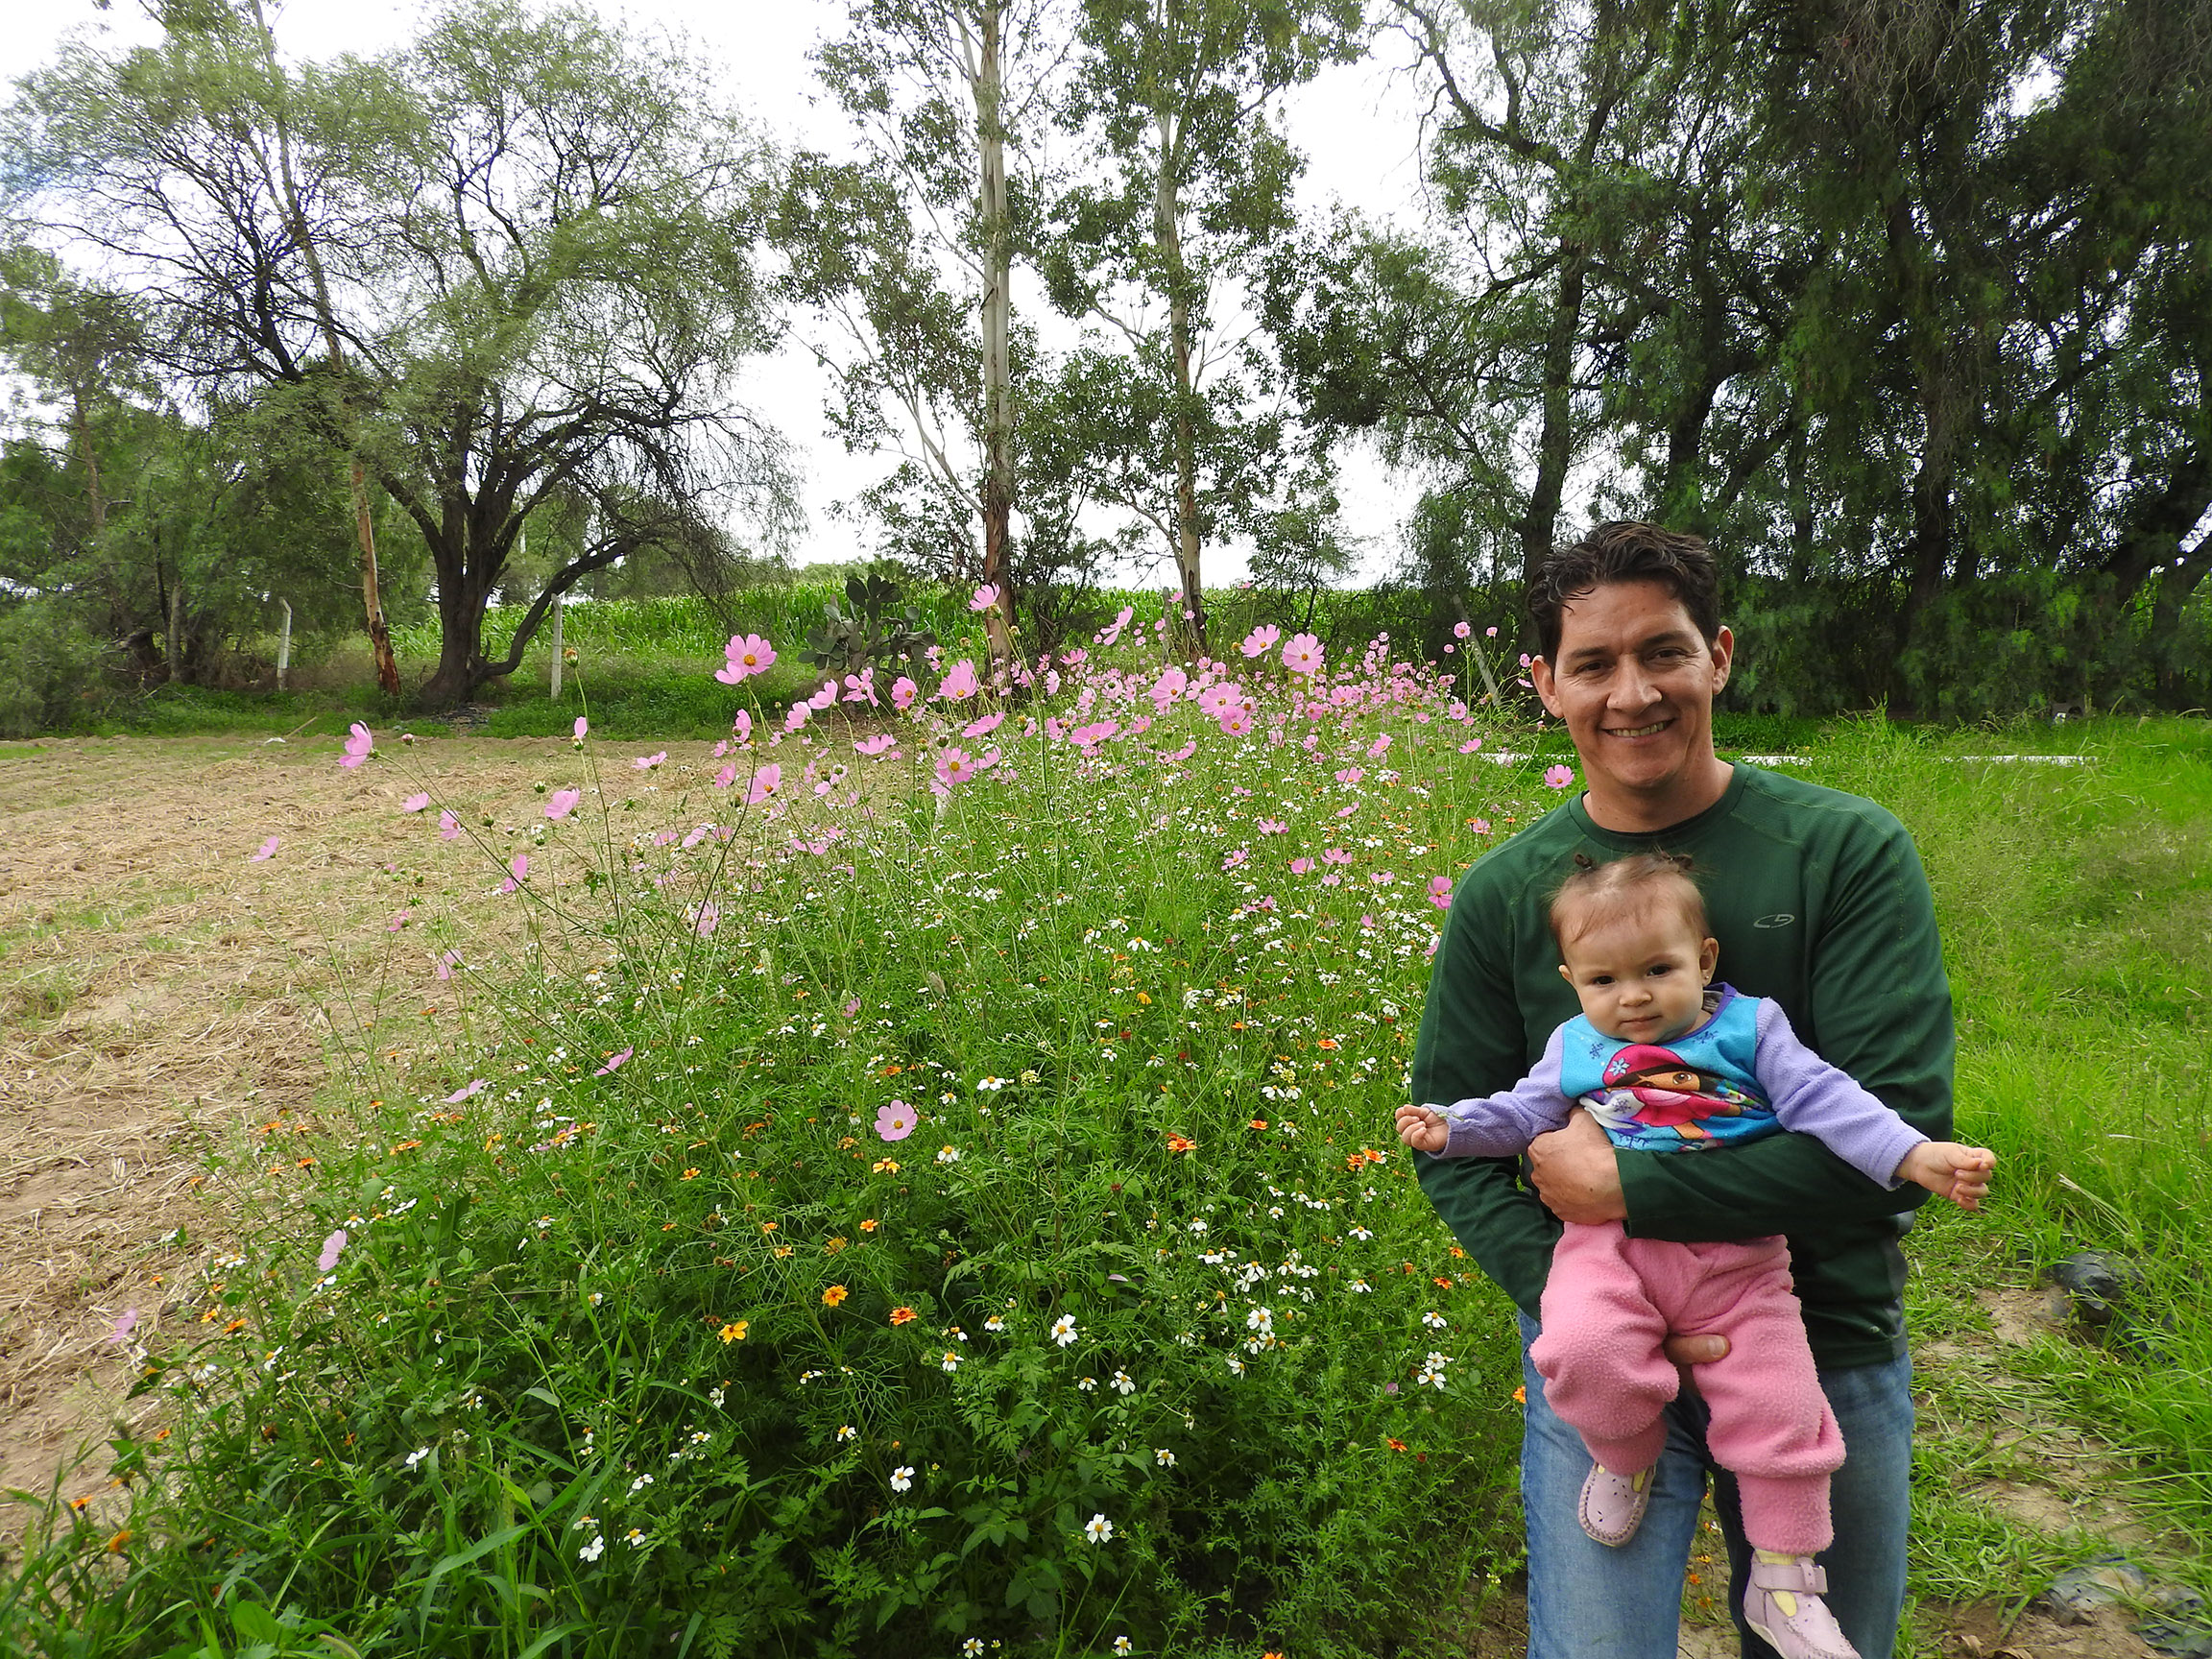 The author, Héctor Ávila Villegas, stands beside a pollinator habitat strip full of pink, white, and yellow flowers